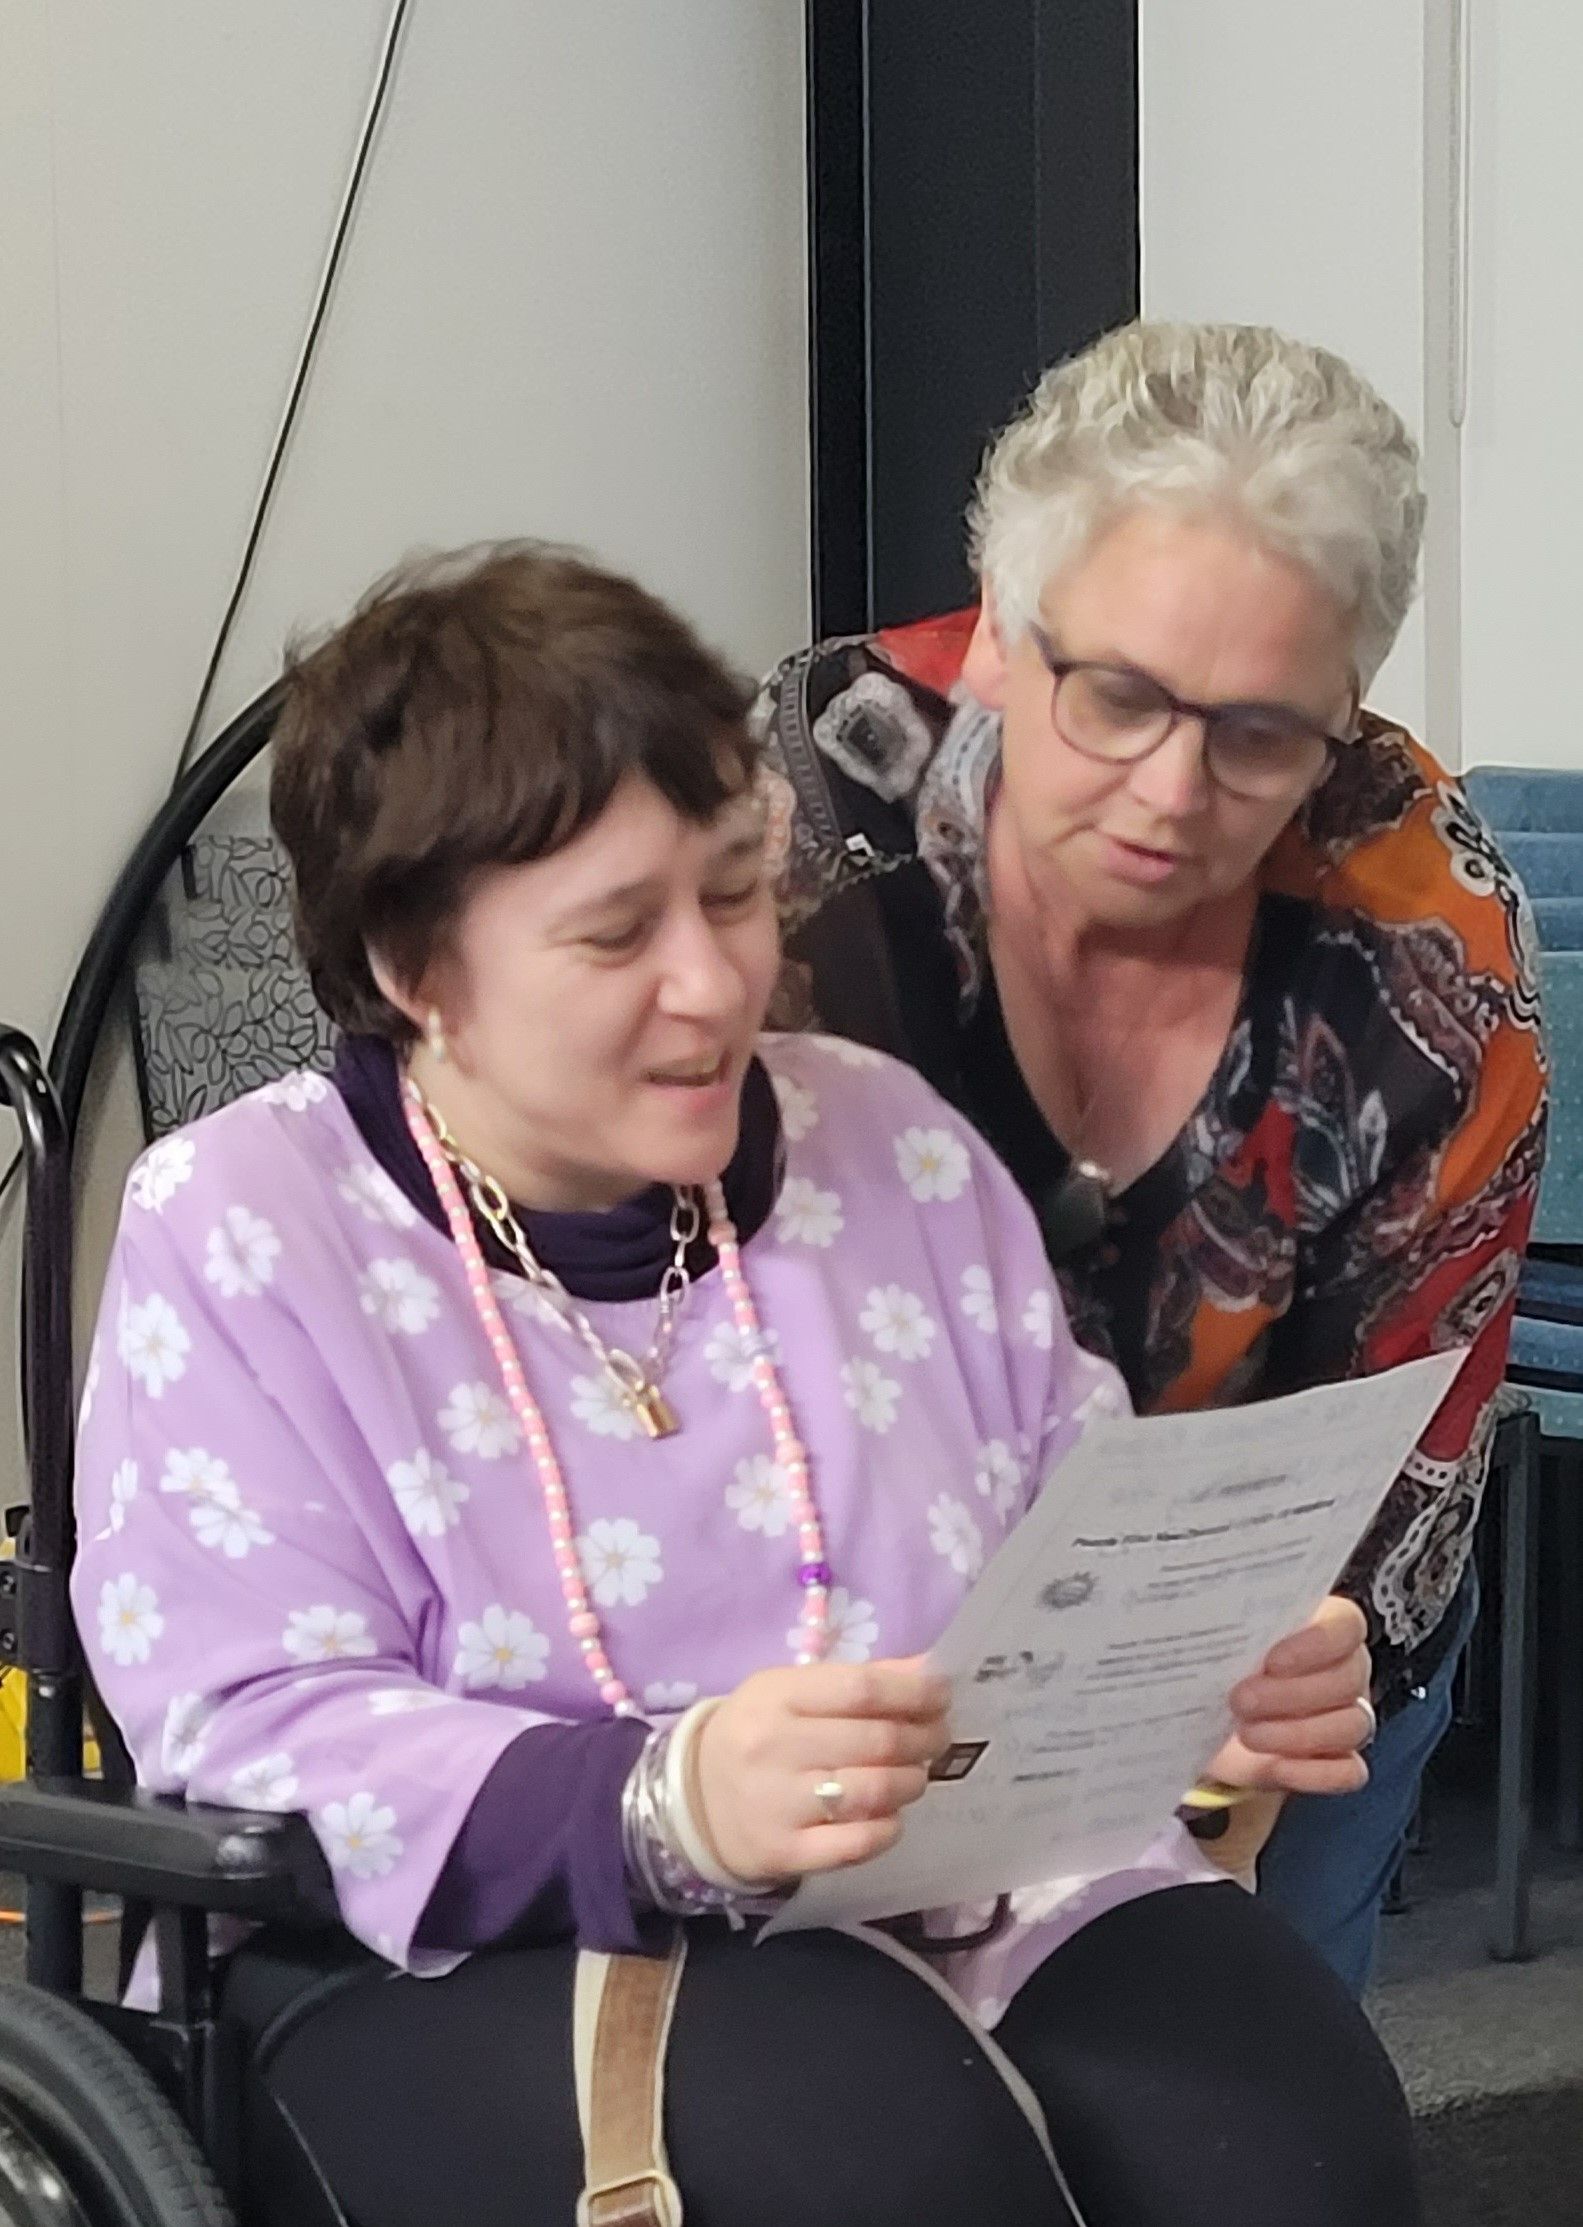 Two woman inside with the one on the left in a wheelchair wearing a pink top with white flowers, she has brown hair and is reading from a piece of paper, the second woman is on the right looking over the other woman's shoulder, she has grey short hair and glasses and is wearing an orange and black top.